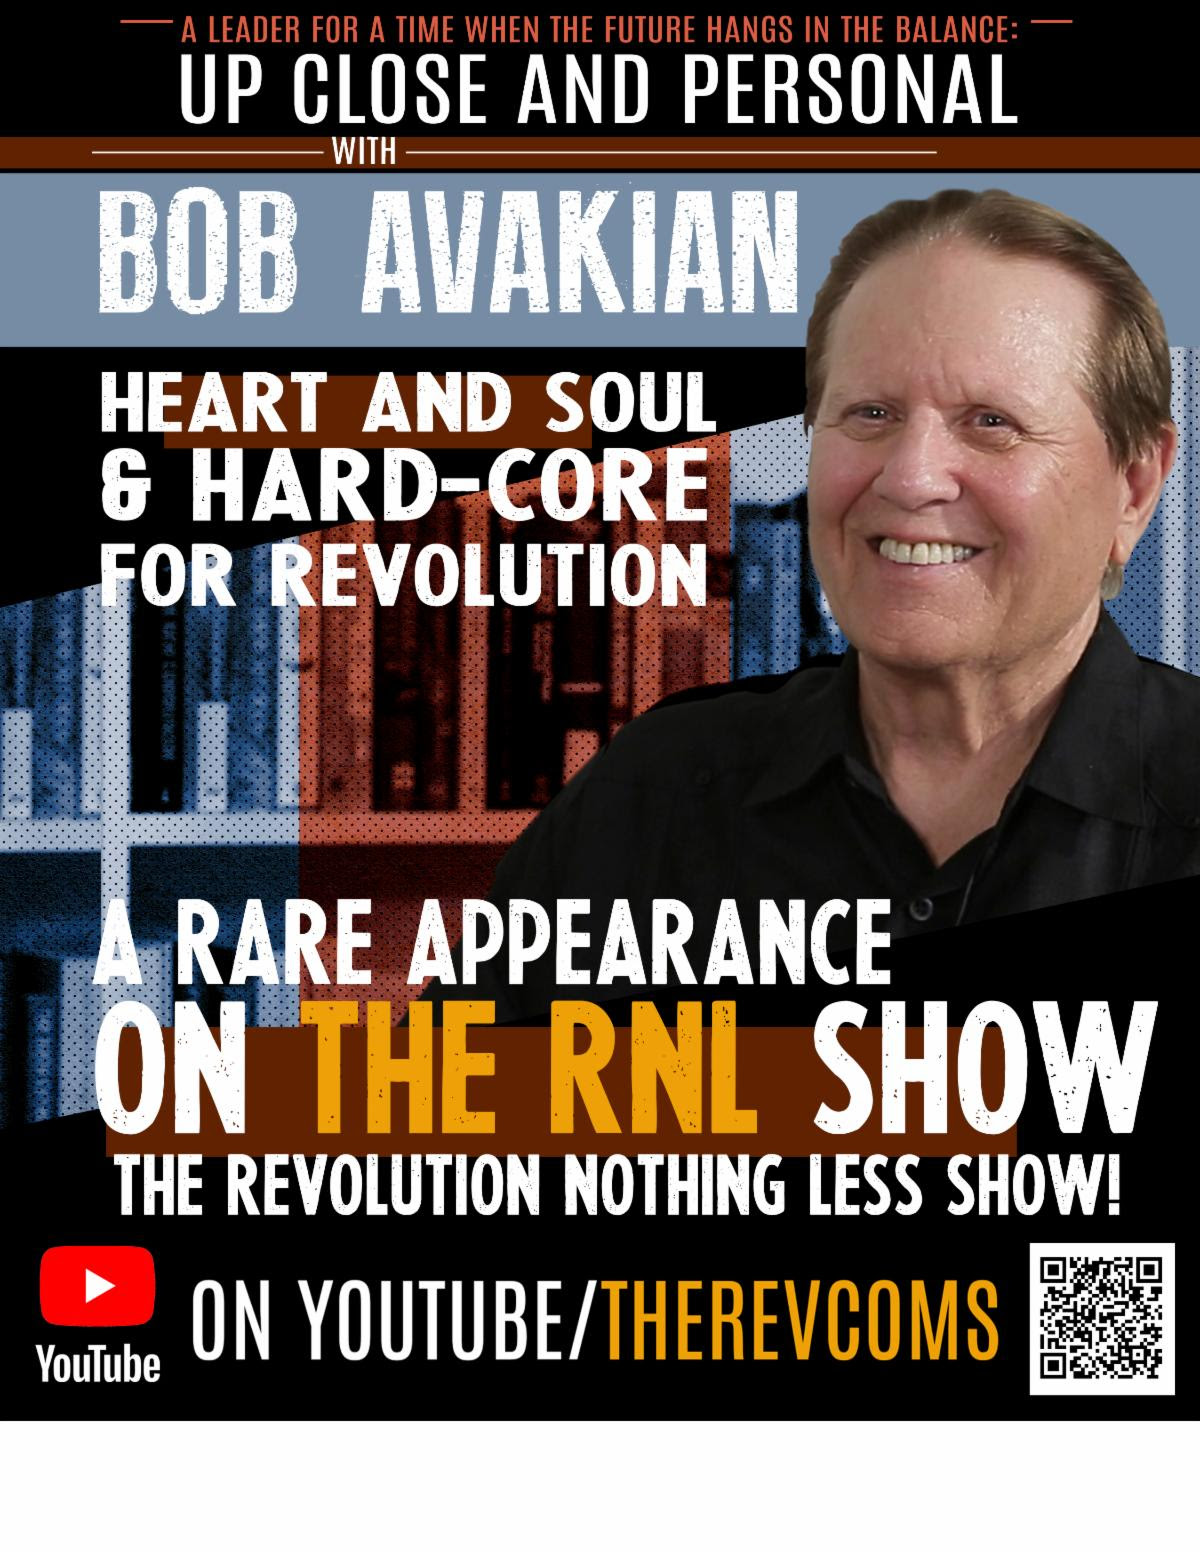 Up Close and Personal - The Bob Avakian Interviews